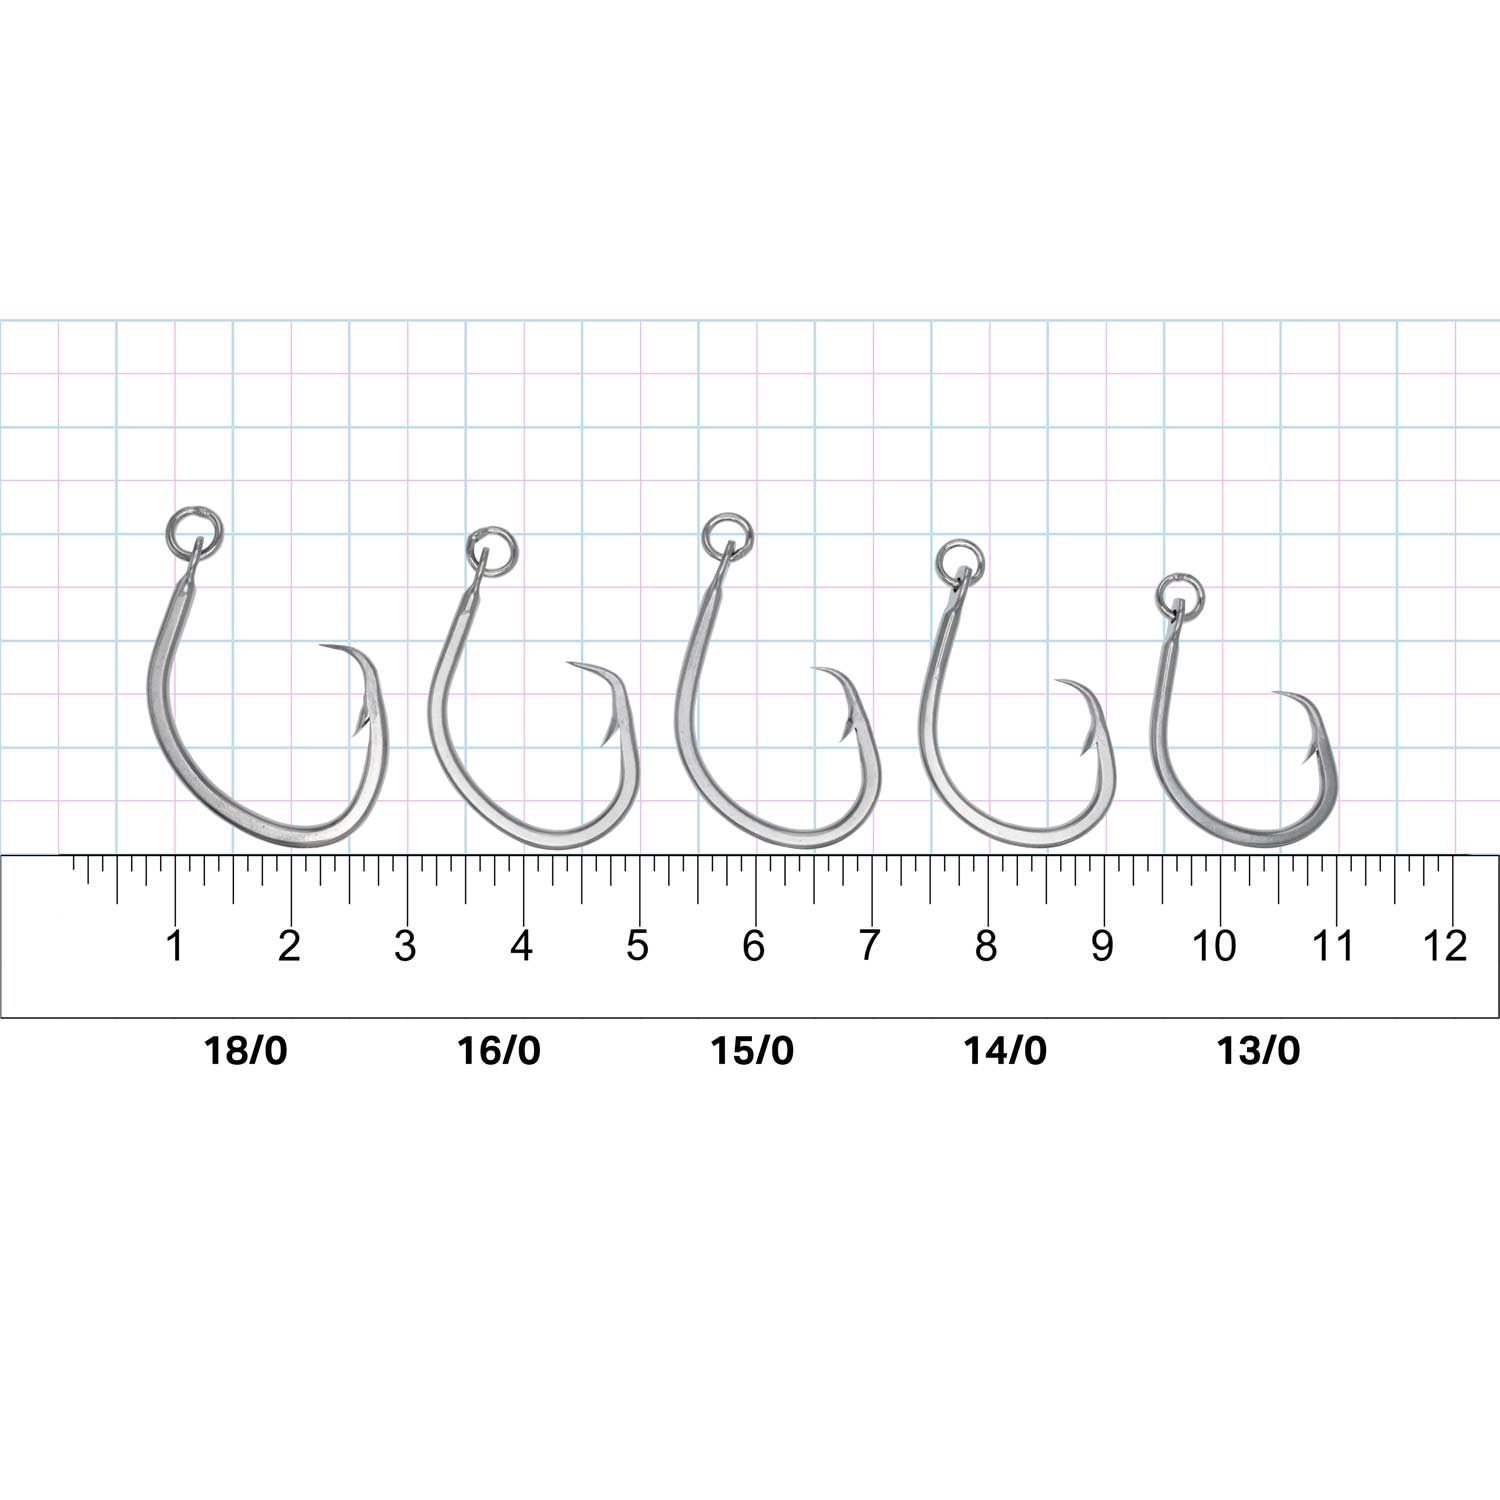 Rite Angler Inline Circle Hook (25 Pack) Saltwater Freshwater Offshore Inshore Fishing Live Bait #1, 2, 1/0, 2/0, 3/0, 4/0, 5/0 Hook Sizes